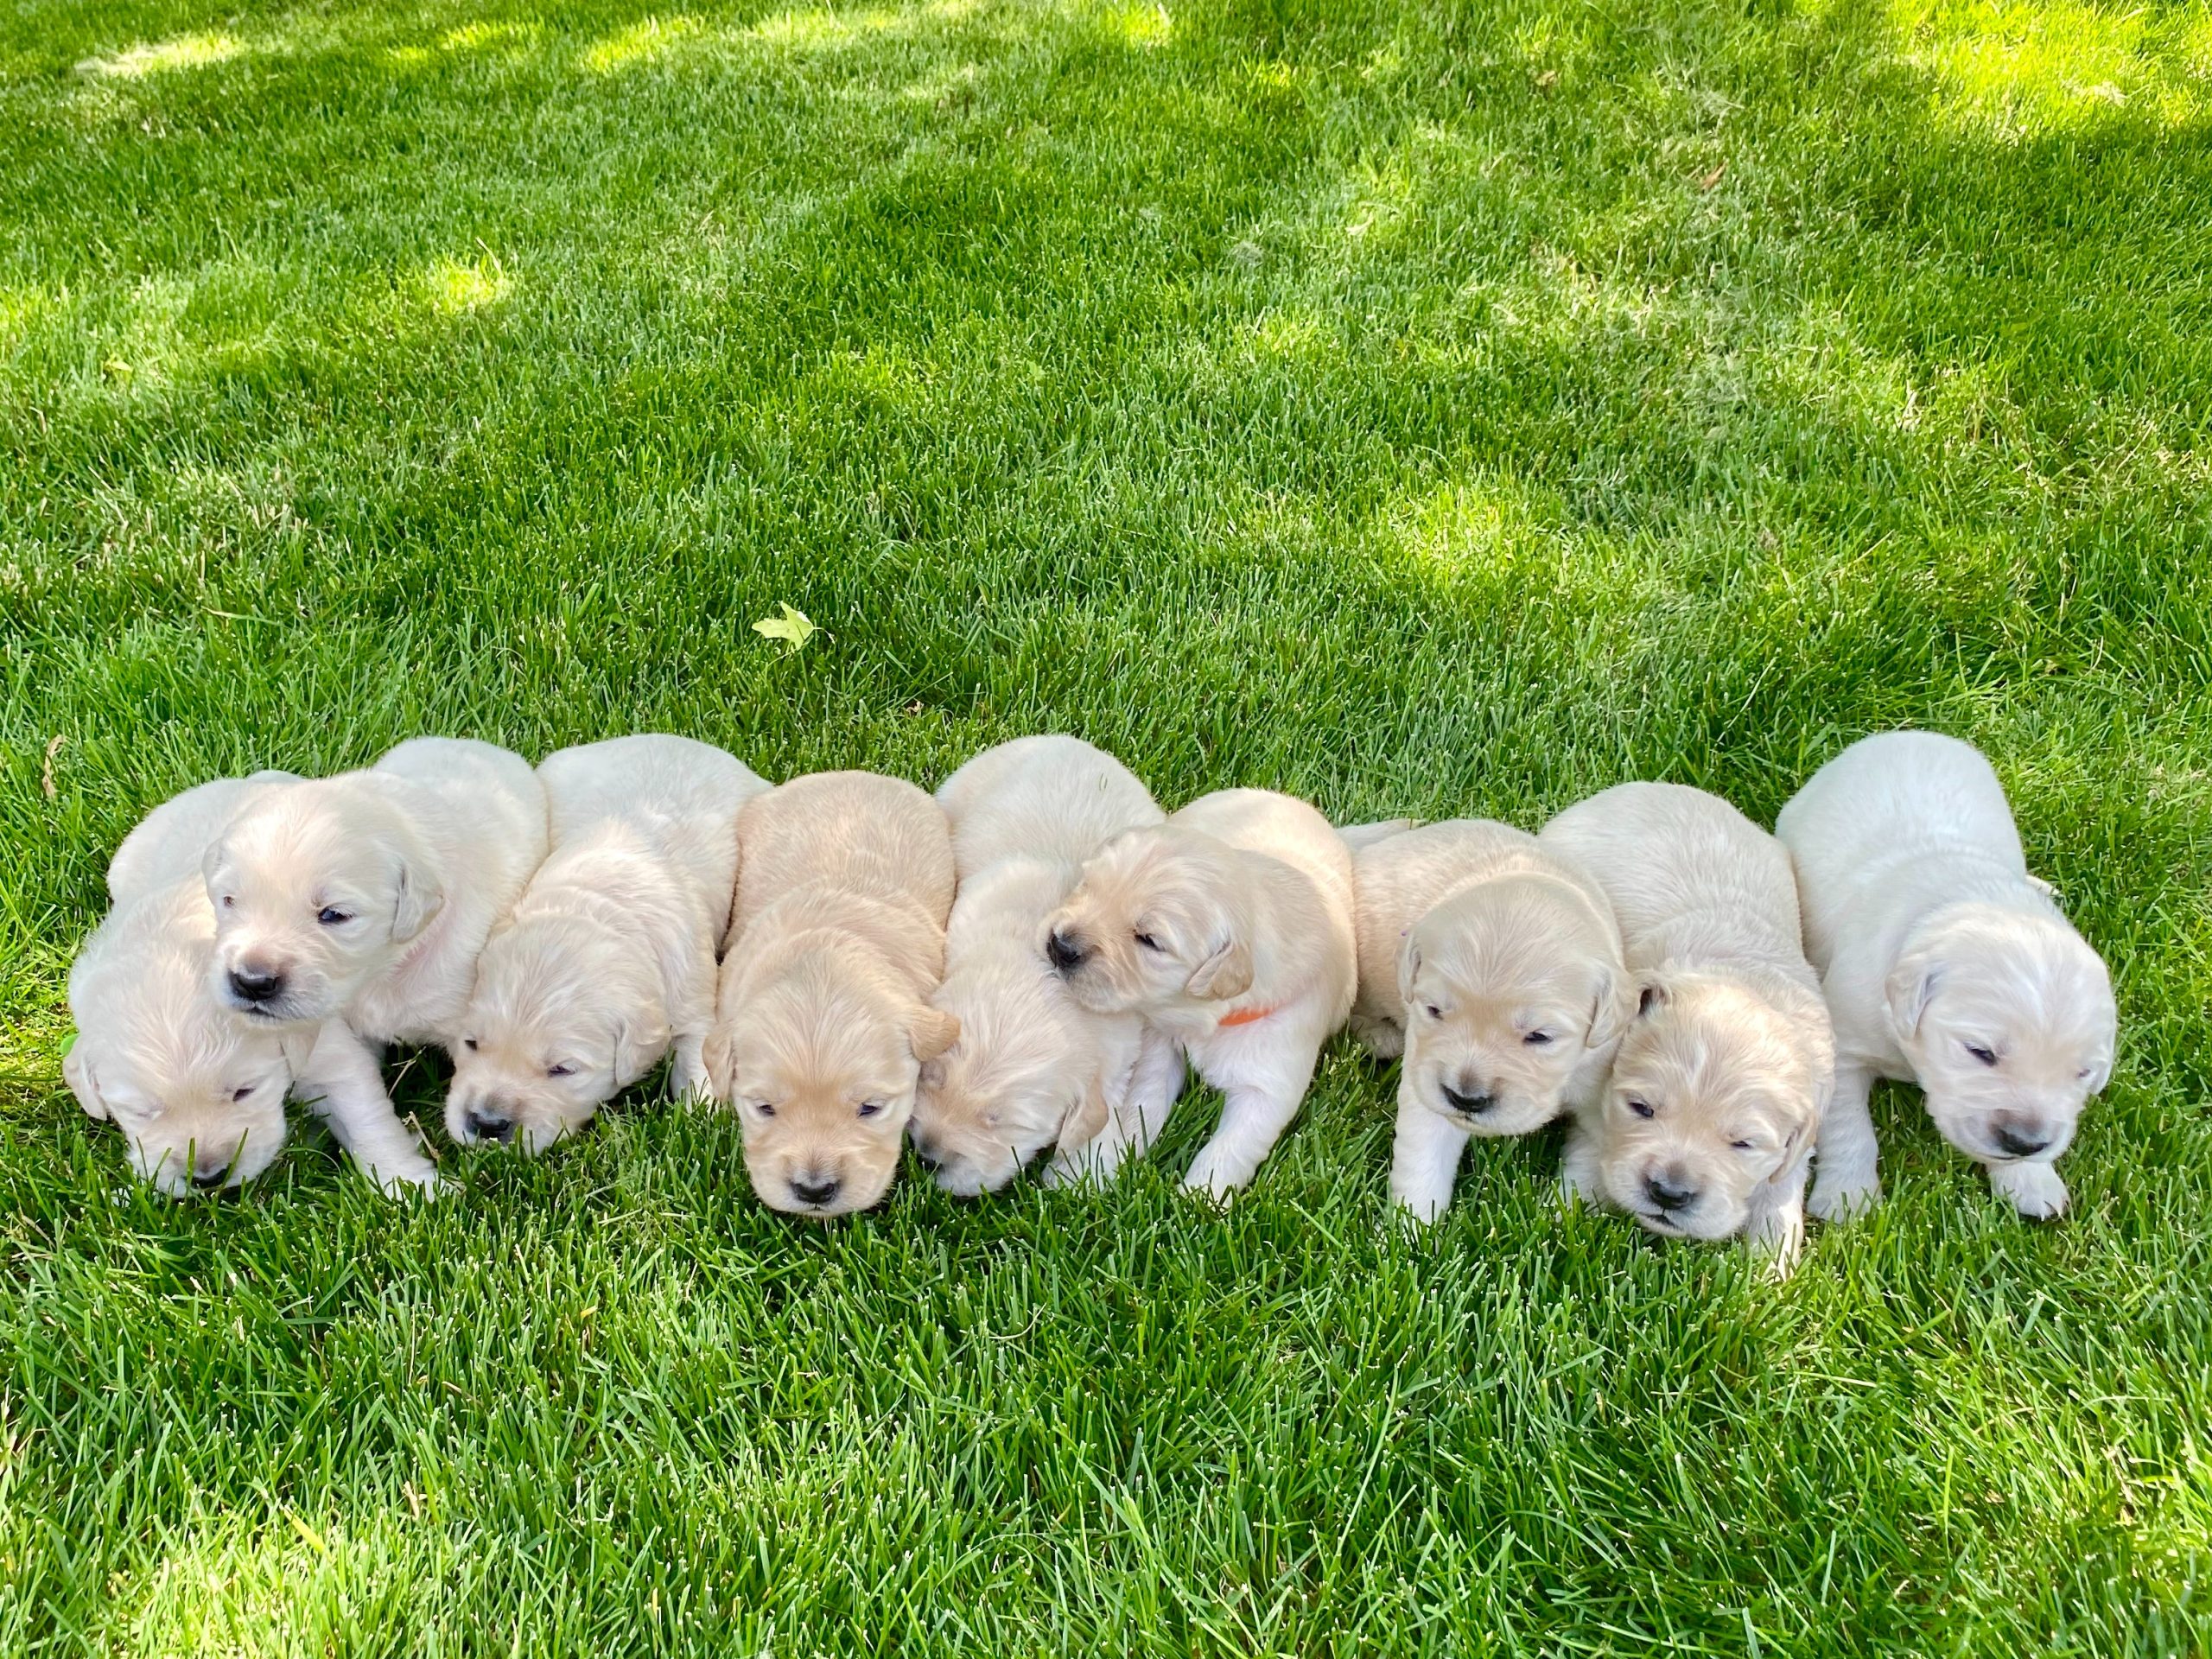 Campus and community invited to take a break with puppies